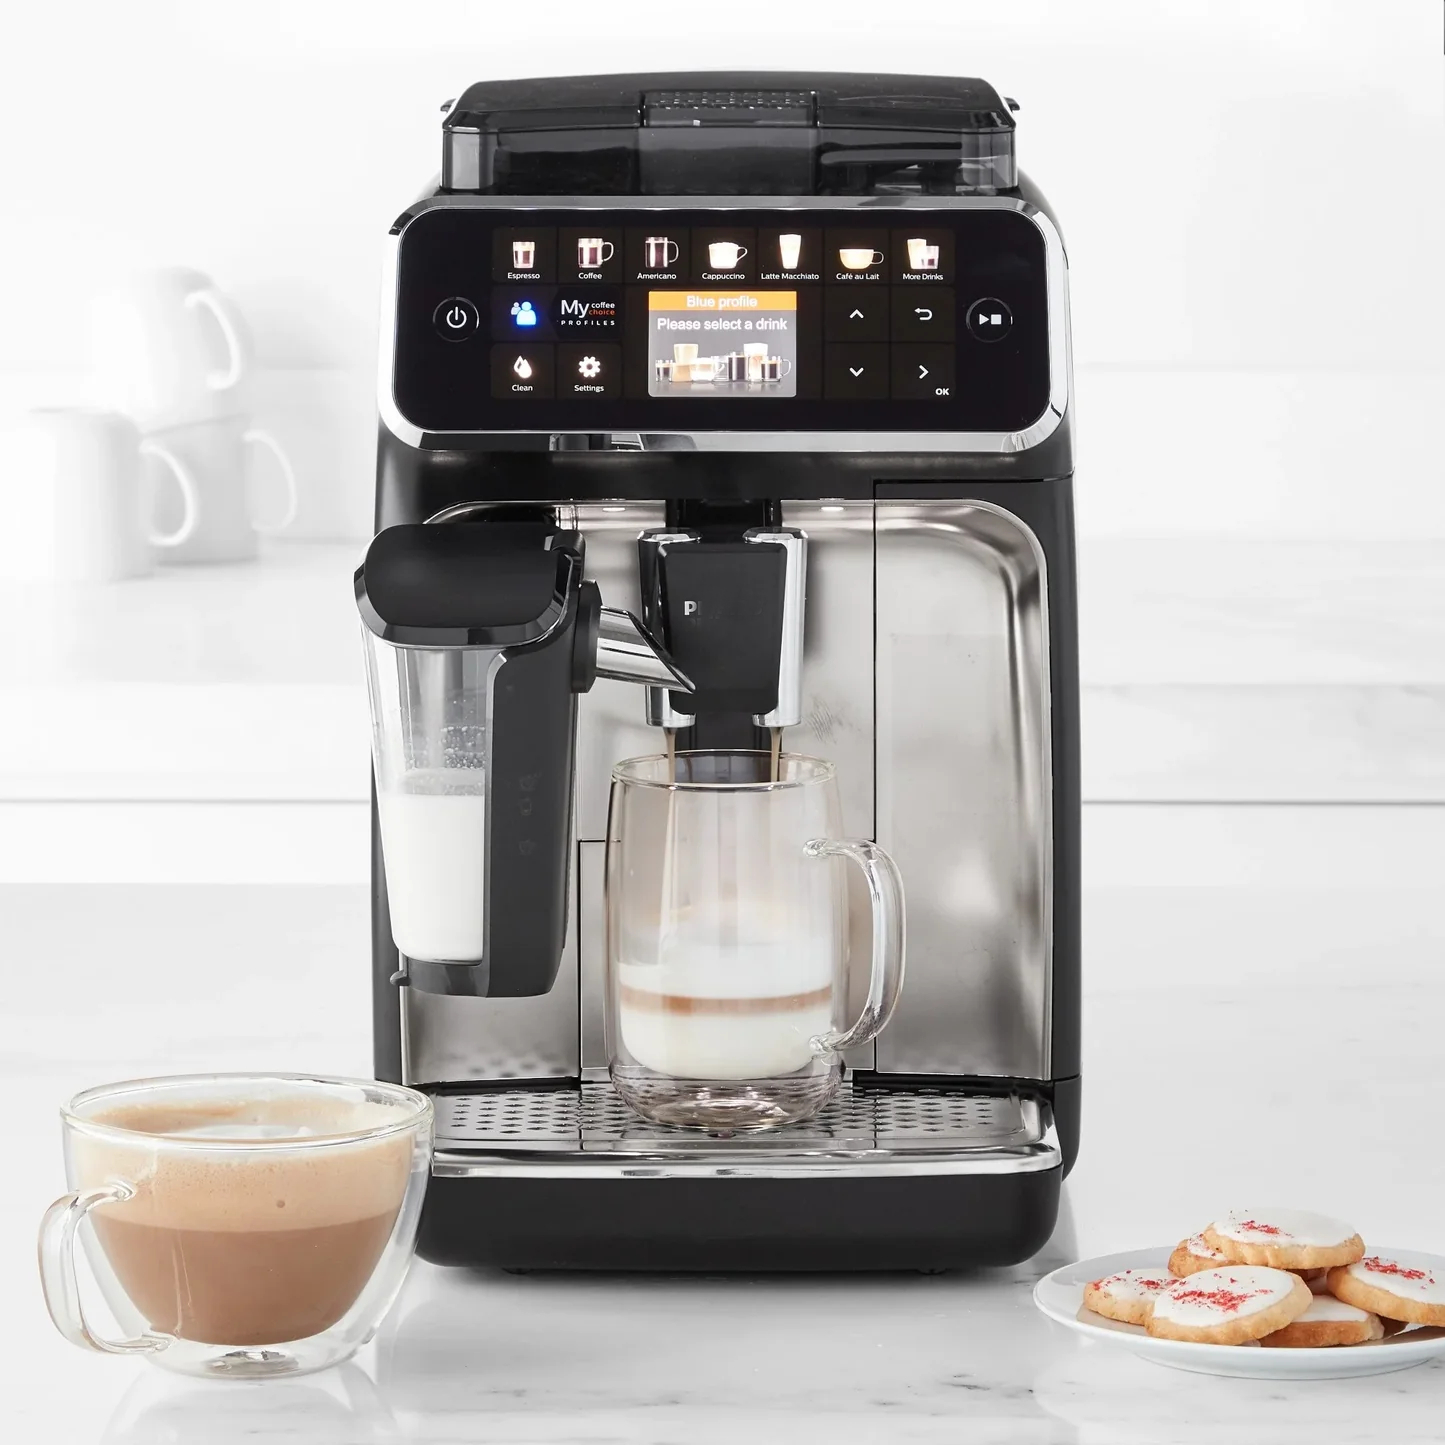 P 5400 Series Fully Automatic Espresso & LatteGo Machine [LIMITED SALE]